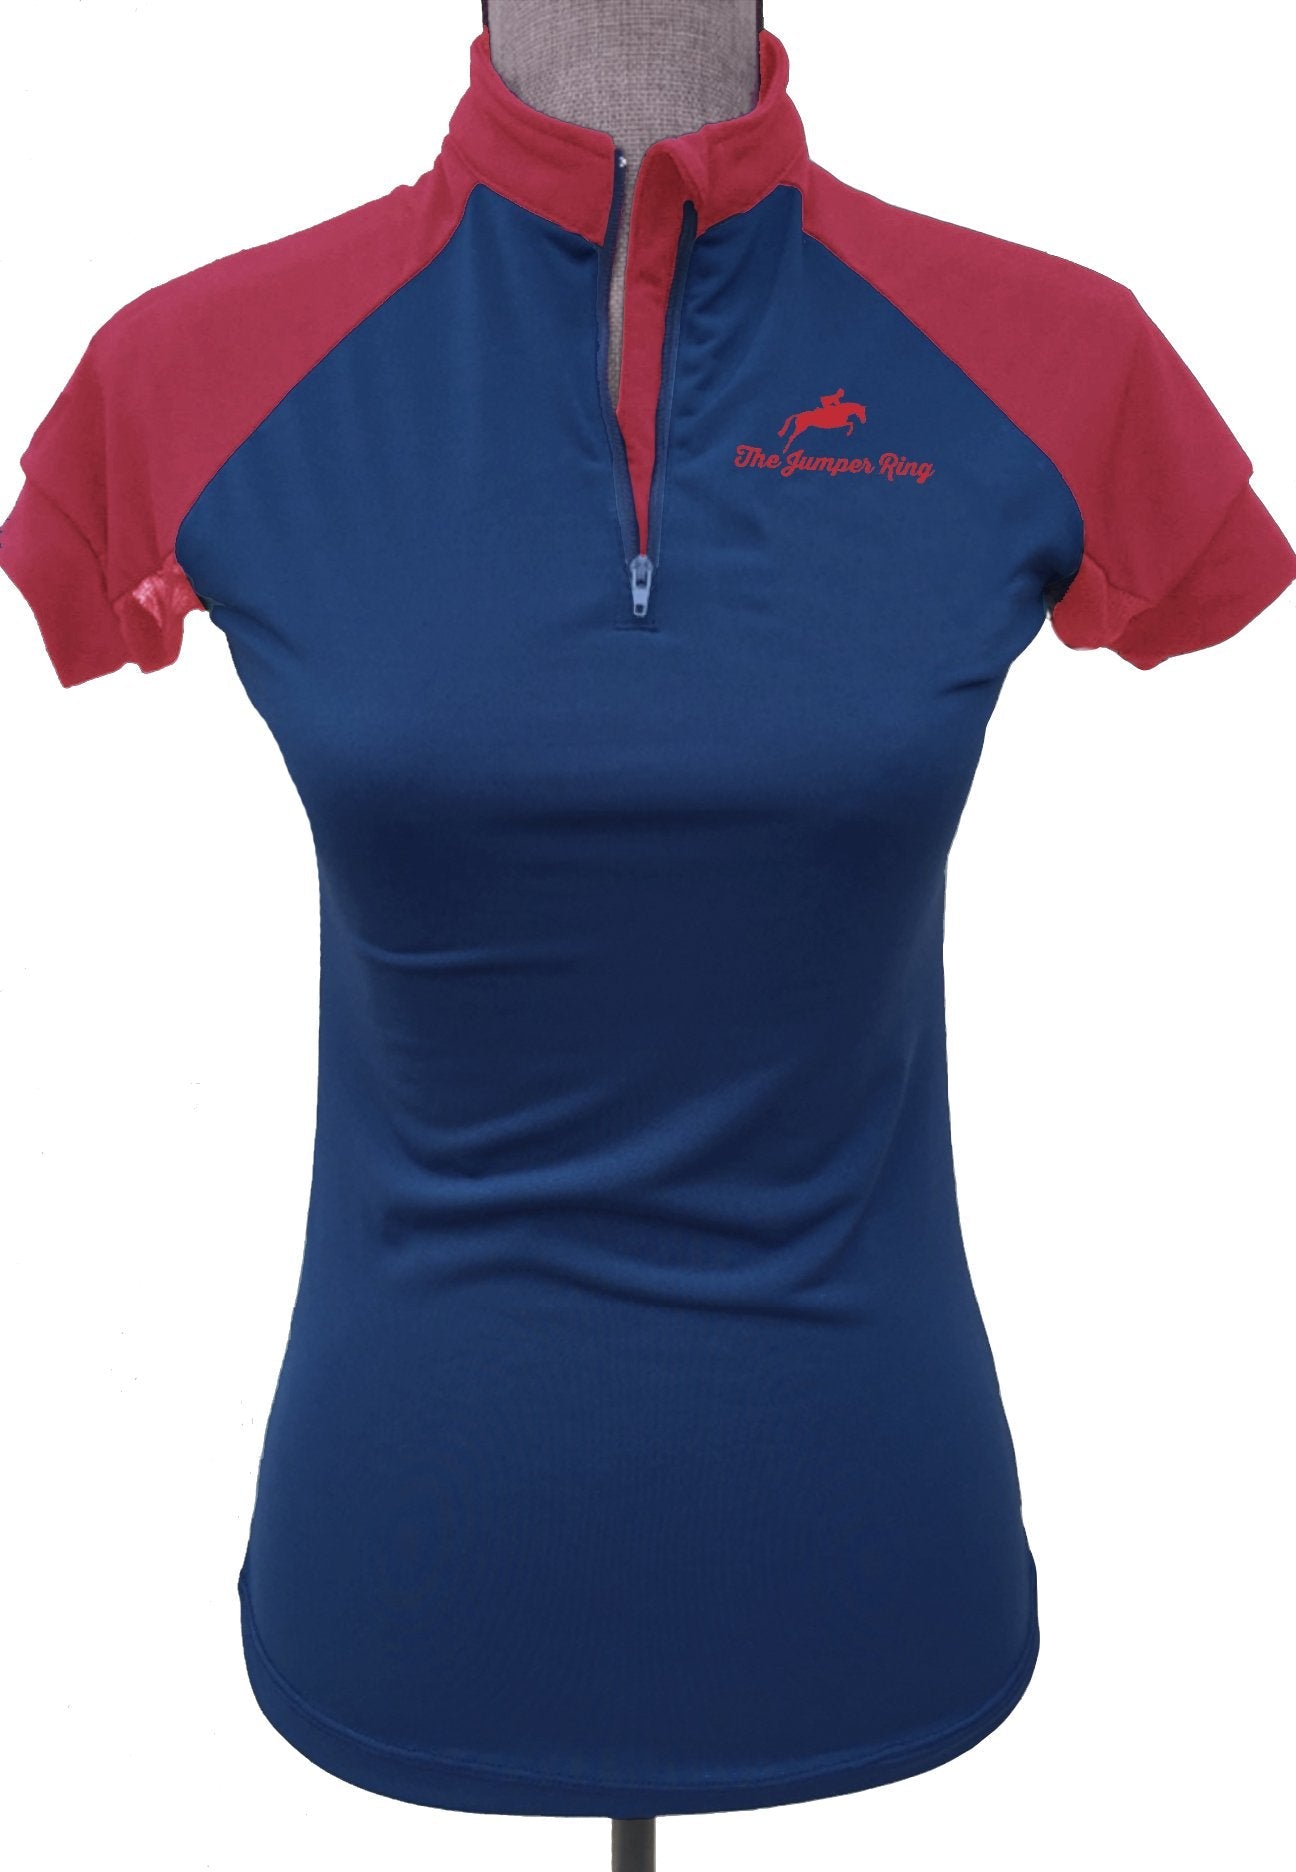 The Jumper Ring Adult Custom Sun Shirt - Short Sleeve Navy with Red Accents